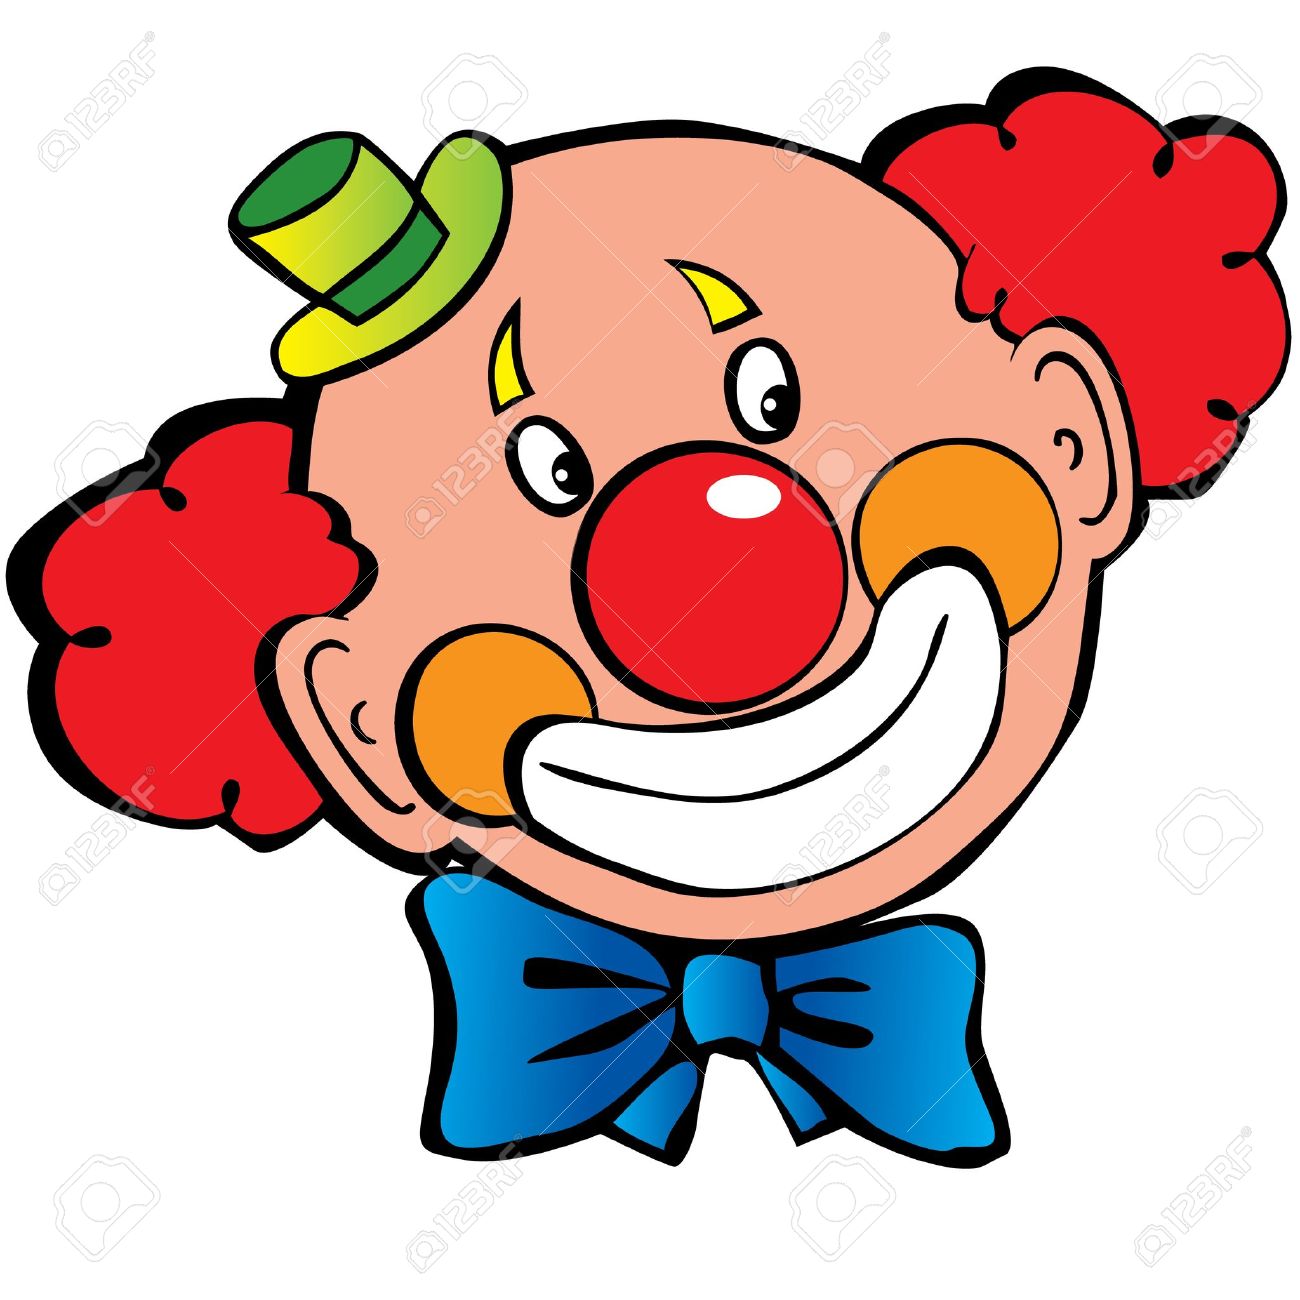 Image of clown face clipart 9 free clown clipart 1 page of